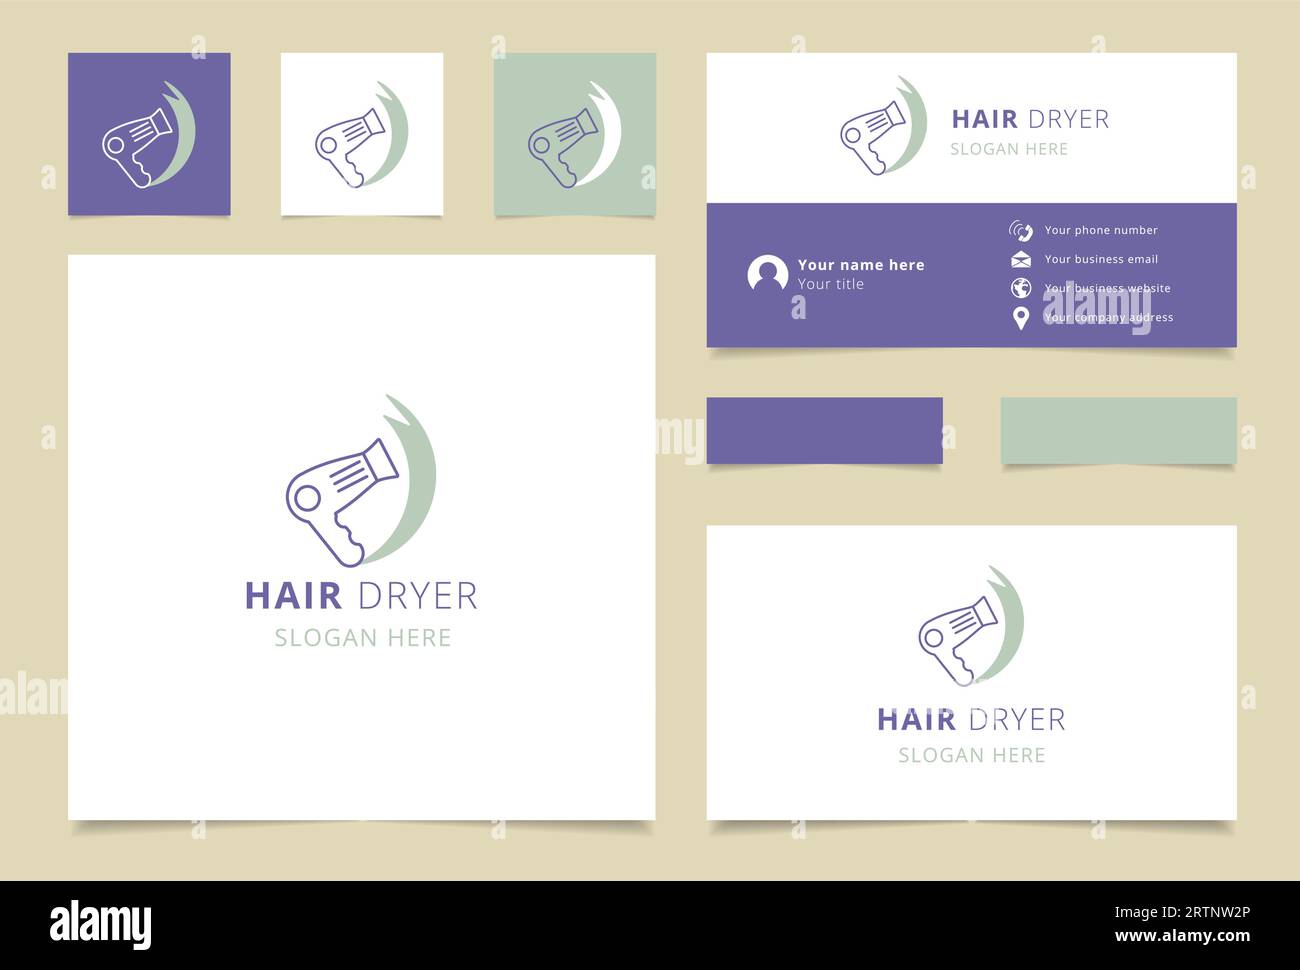 Hair dryer logo design with editable slogan. Branding book and business card template. Stock Vector